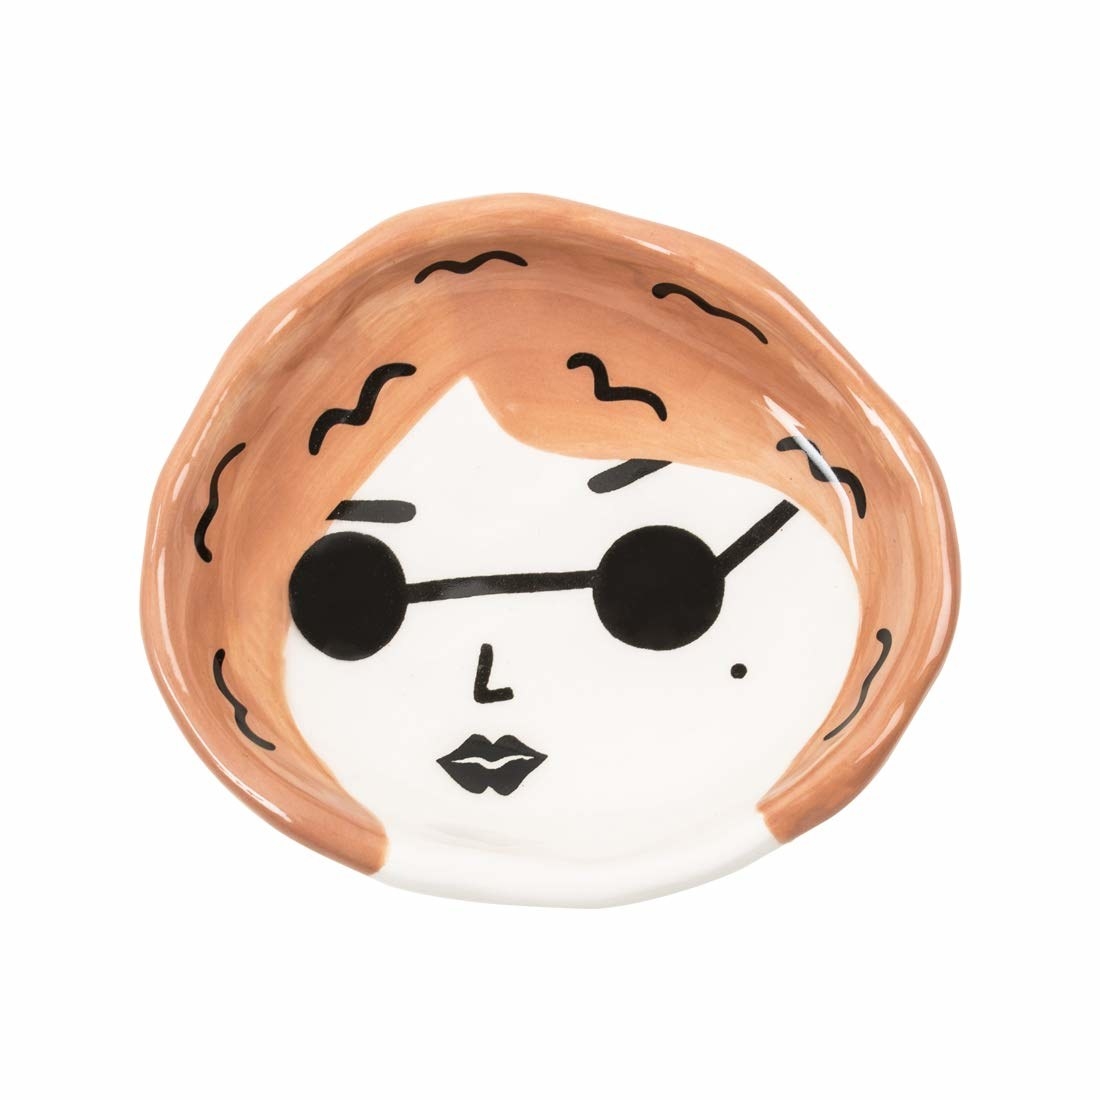 A trinket tray painted to look like a woman with short peach hair, and sunglasses. The illustration has a cartoonish, smug expression.